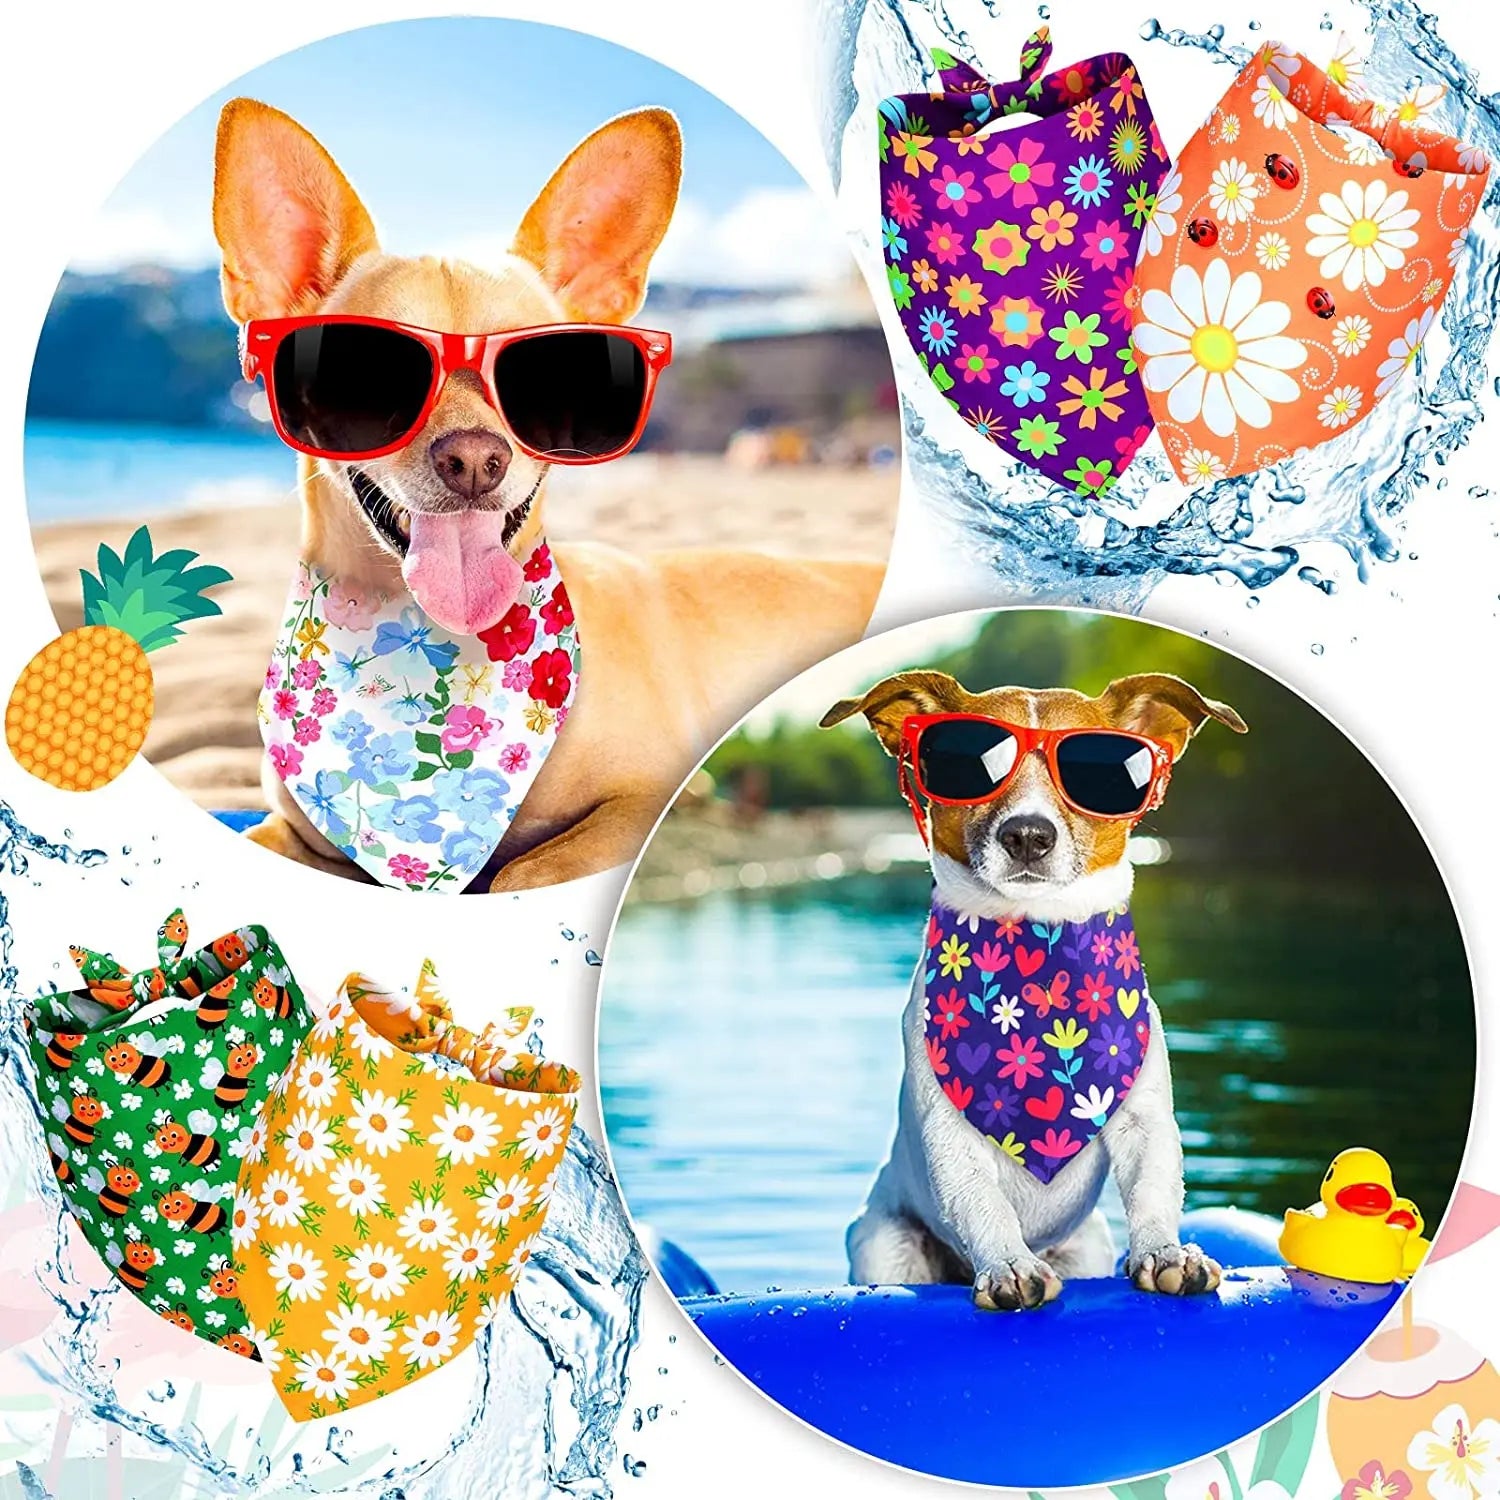 Flower Floral Dog Bandanas Spring Bee Polyester Triangle Dog Scarf